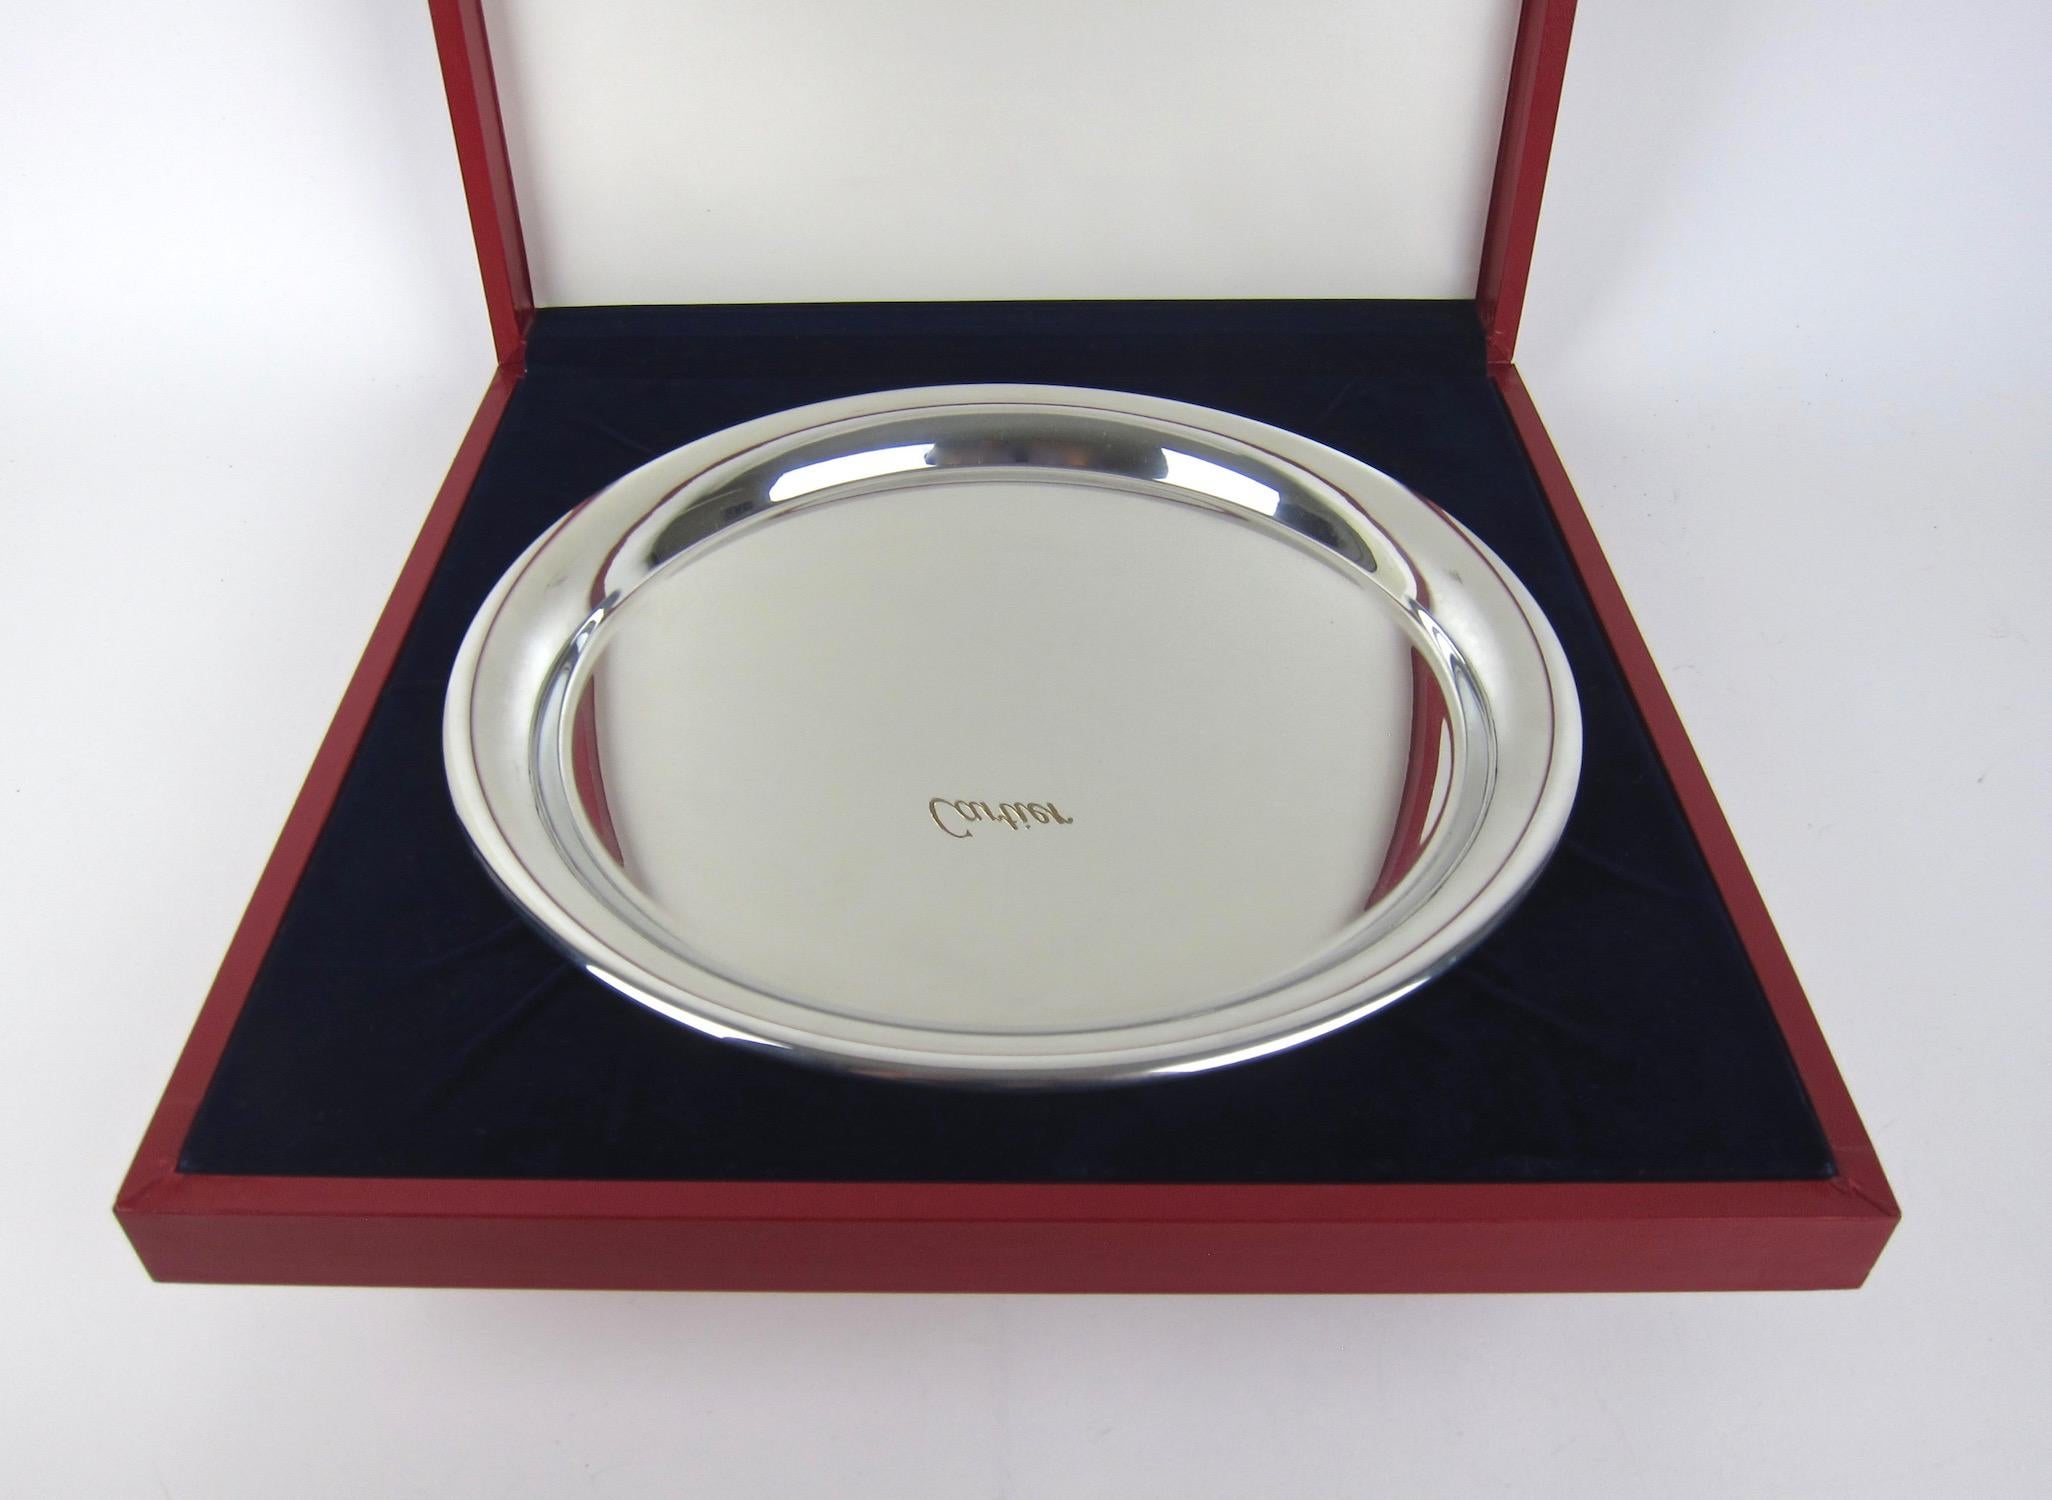 A vintage Cartier silver serving tray in highly polished and reflective pewter, made in France, circa 1977. The round tray has a sleek Minimalist design with a wire-wrapped rim and is stamped 